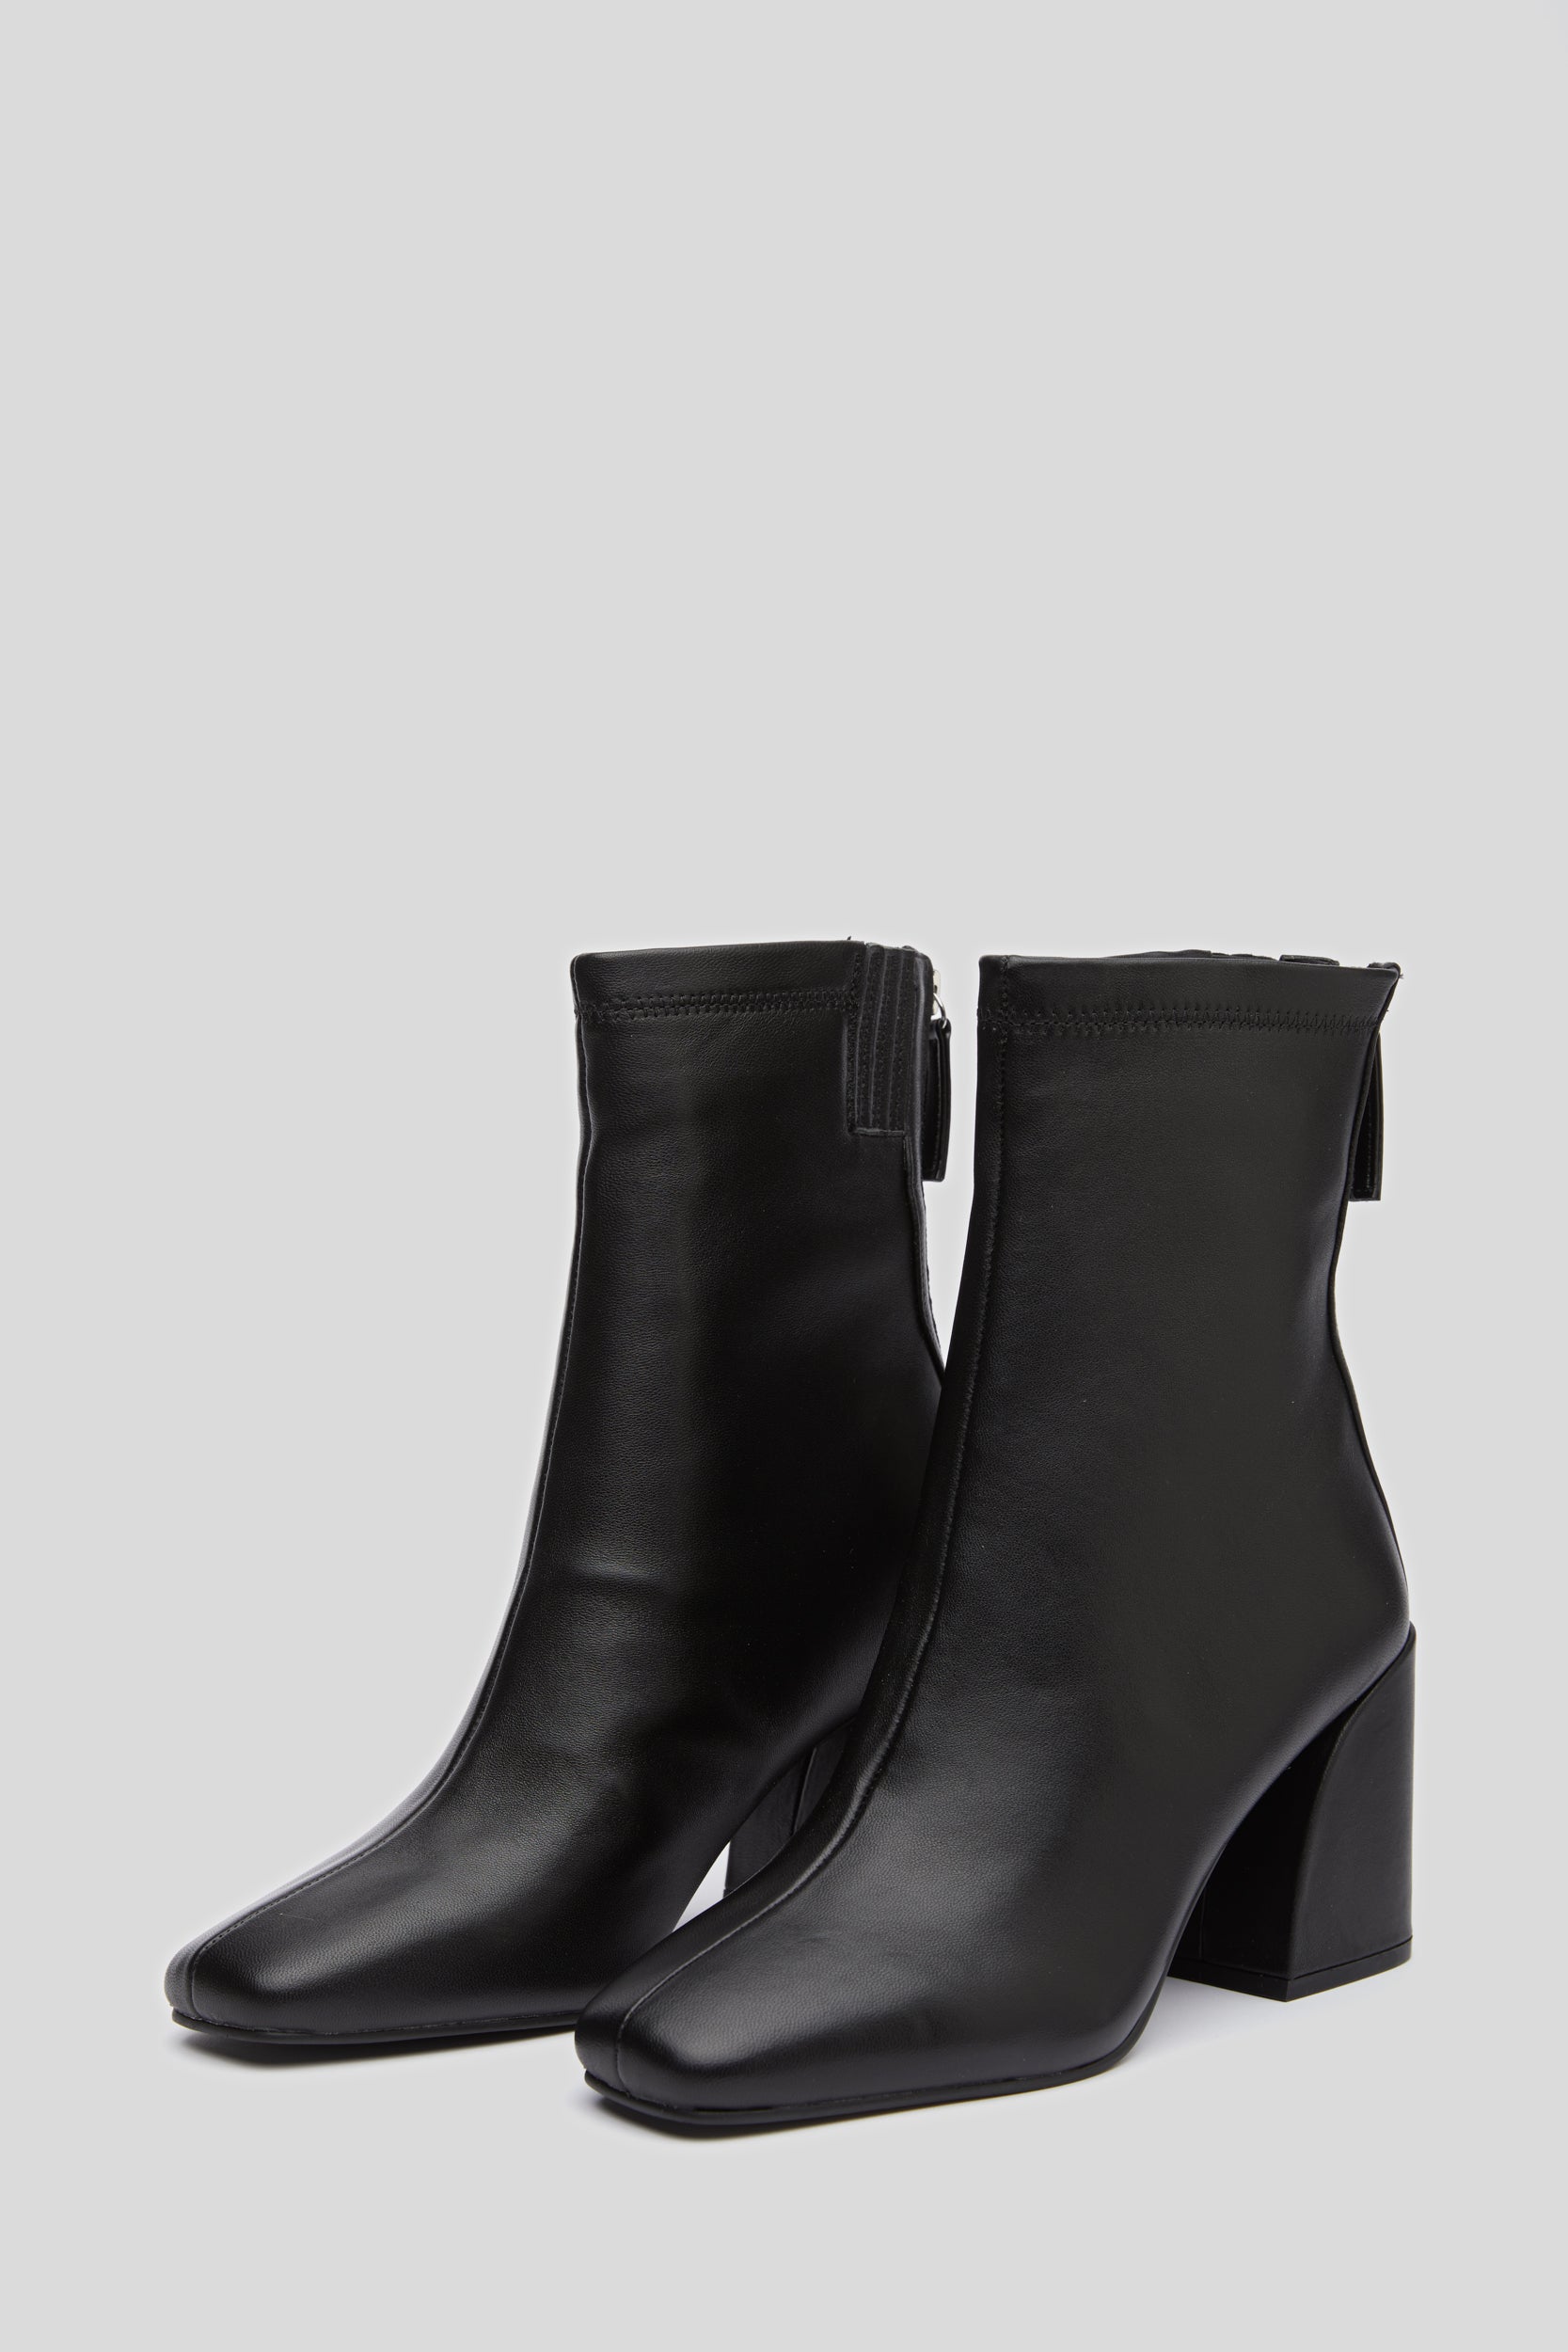 STEVE MADDEN Black "Critical" Ankle Boots